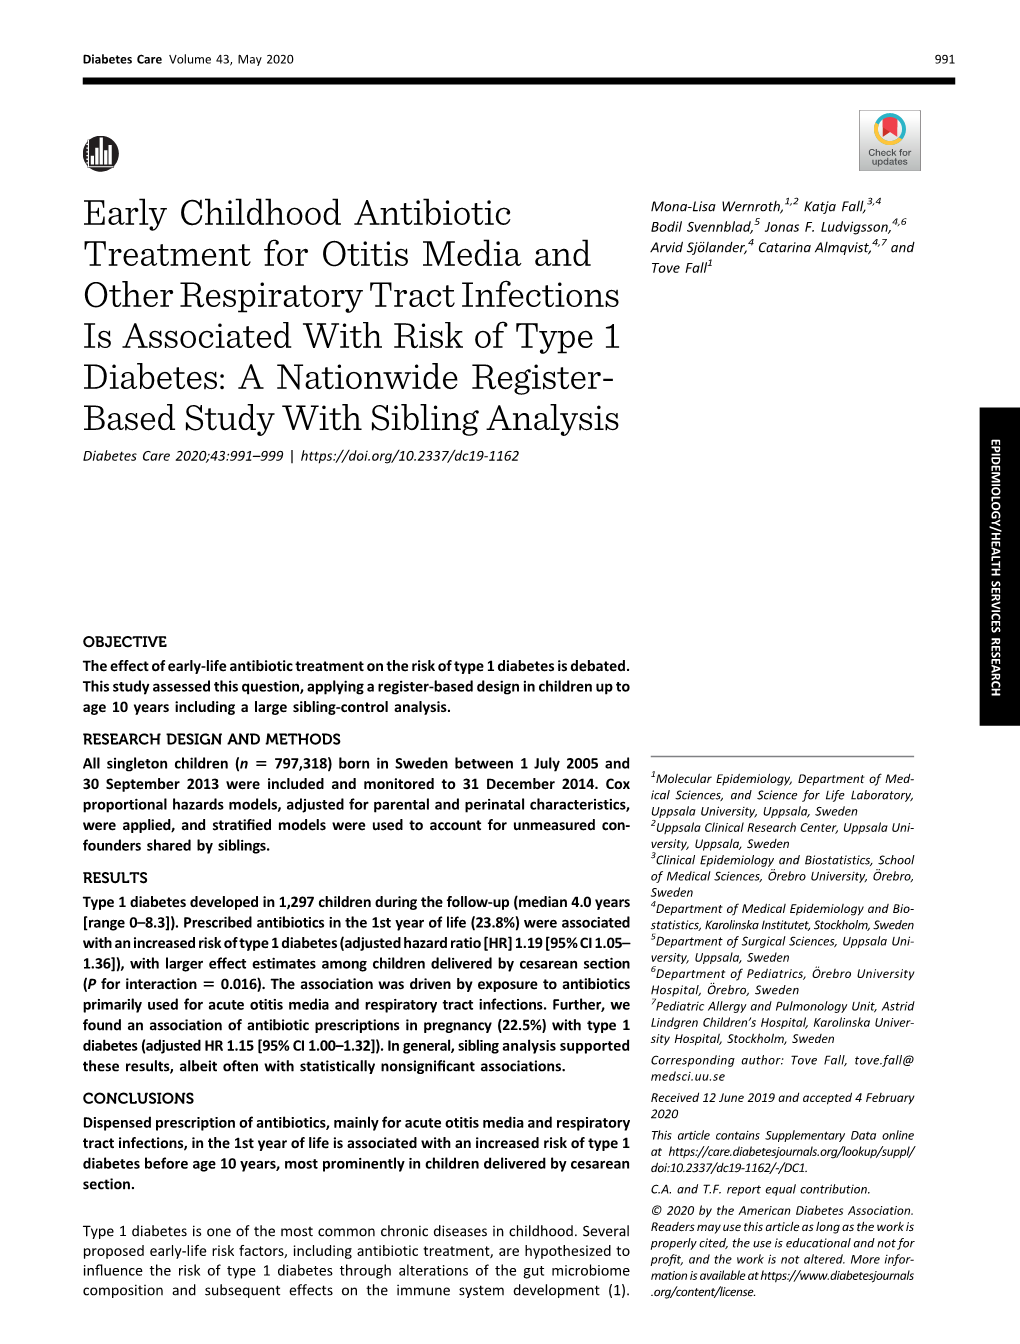 Early Childhood Antibiotic Treatment for Otitis Media and Other Respiratory Tract Infections Is Associated with Risk of Type